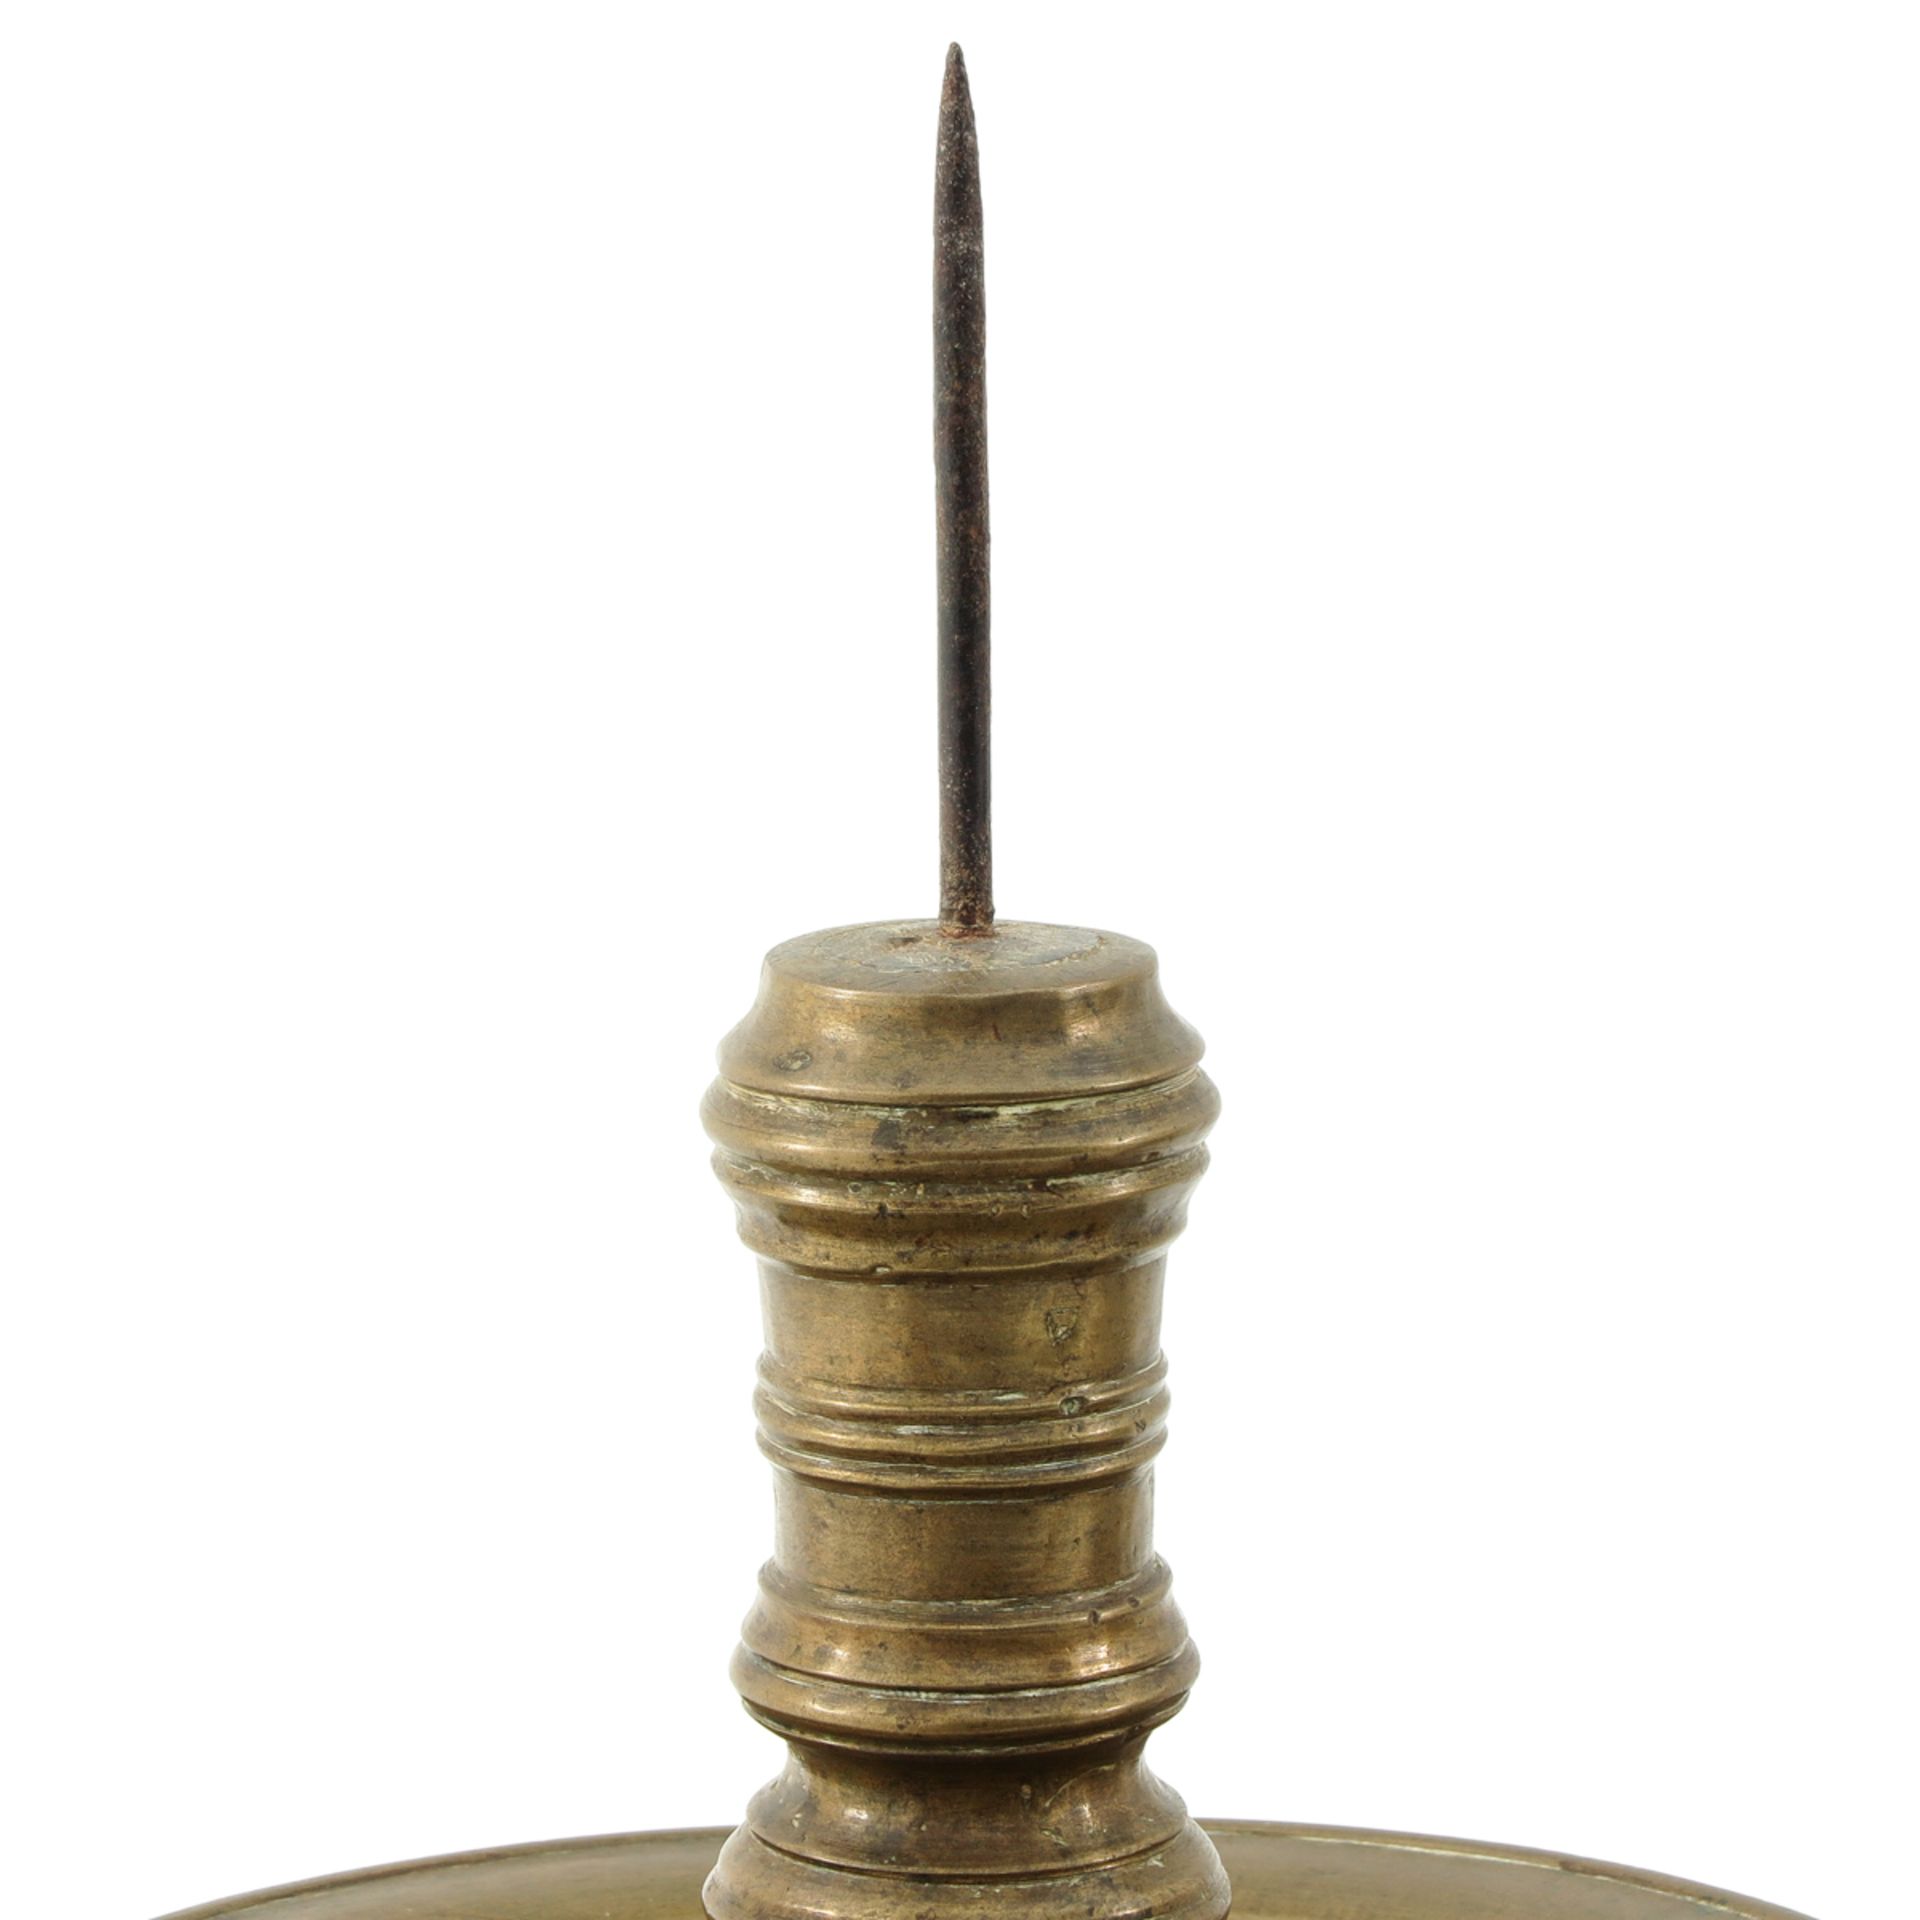 A Pair of Antique Brass Candlesticks - Image 6 of 7